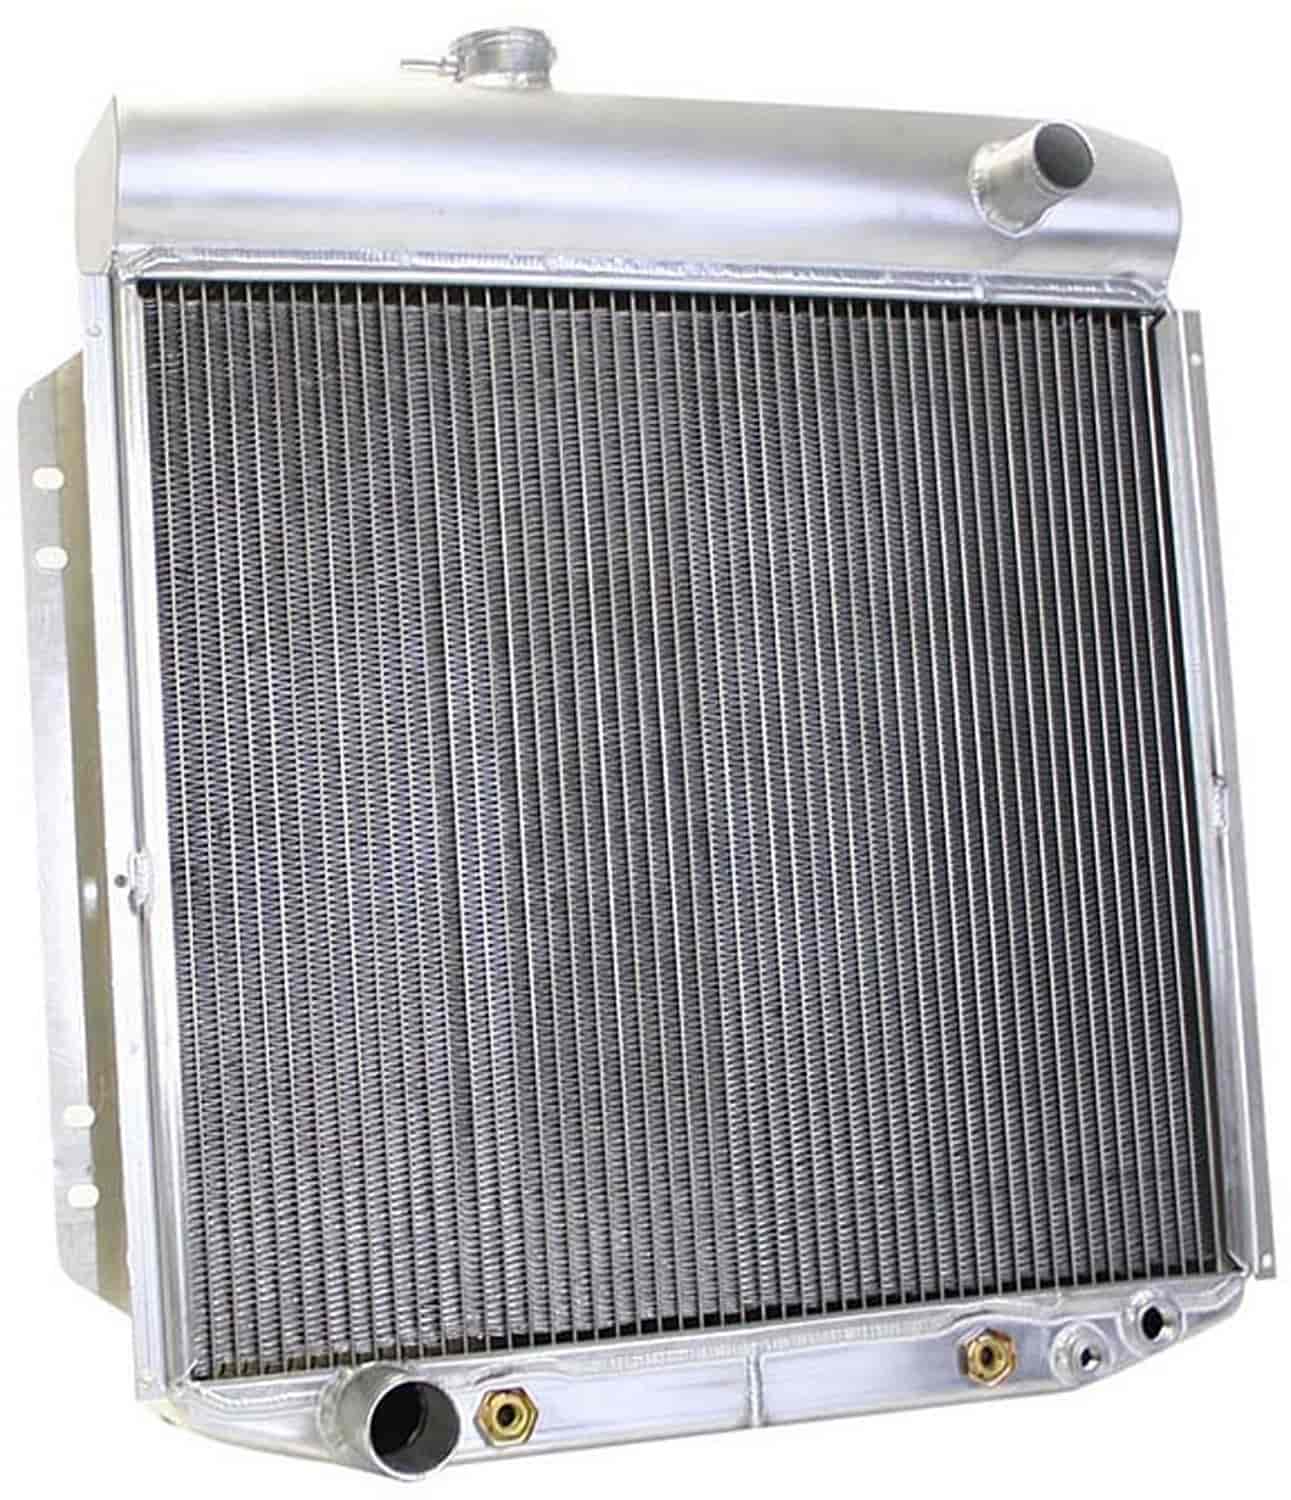 ExactFit Radiator for 1953-1956 Ford Truck with Late